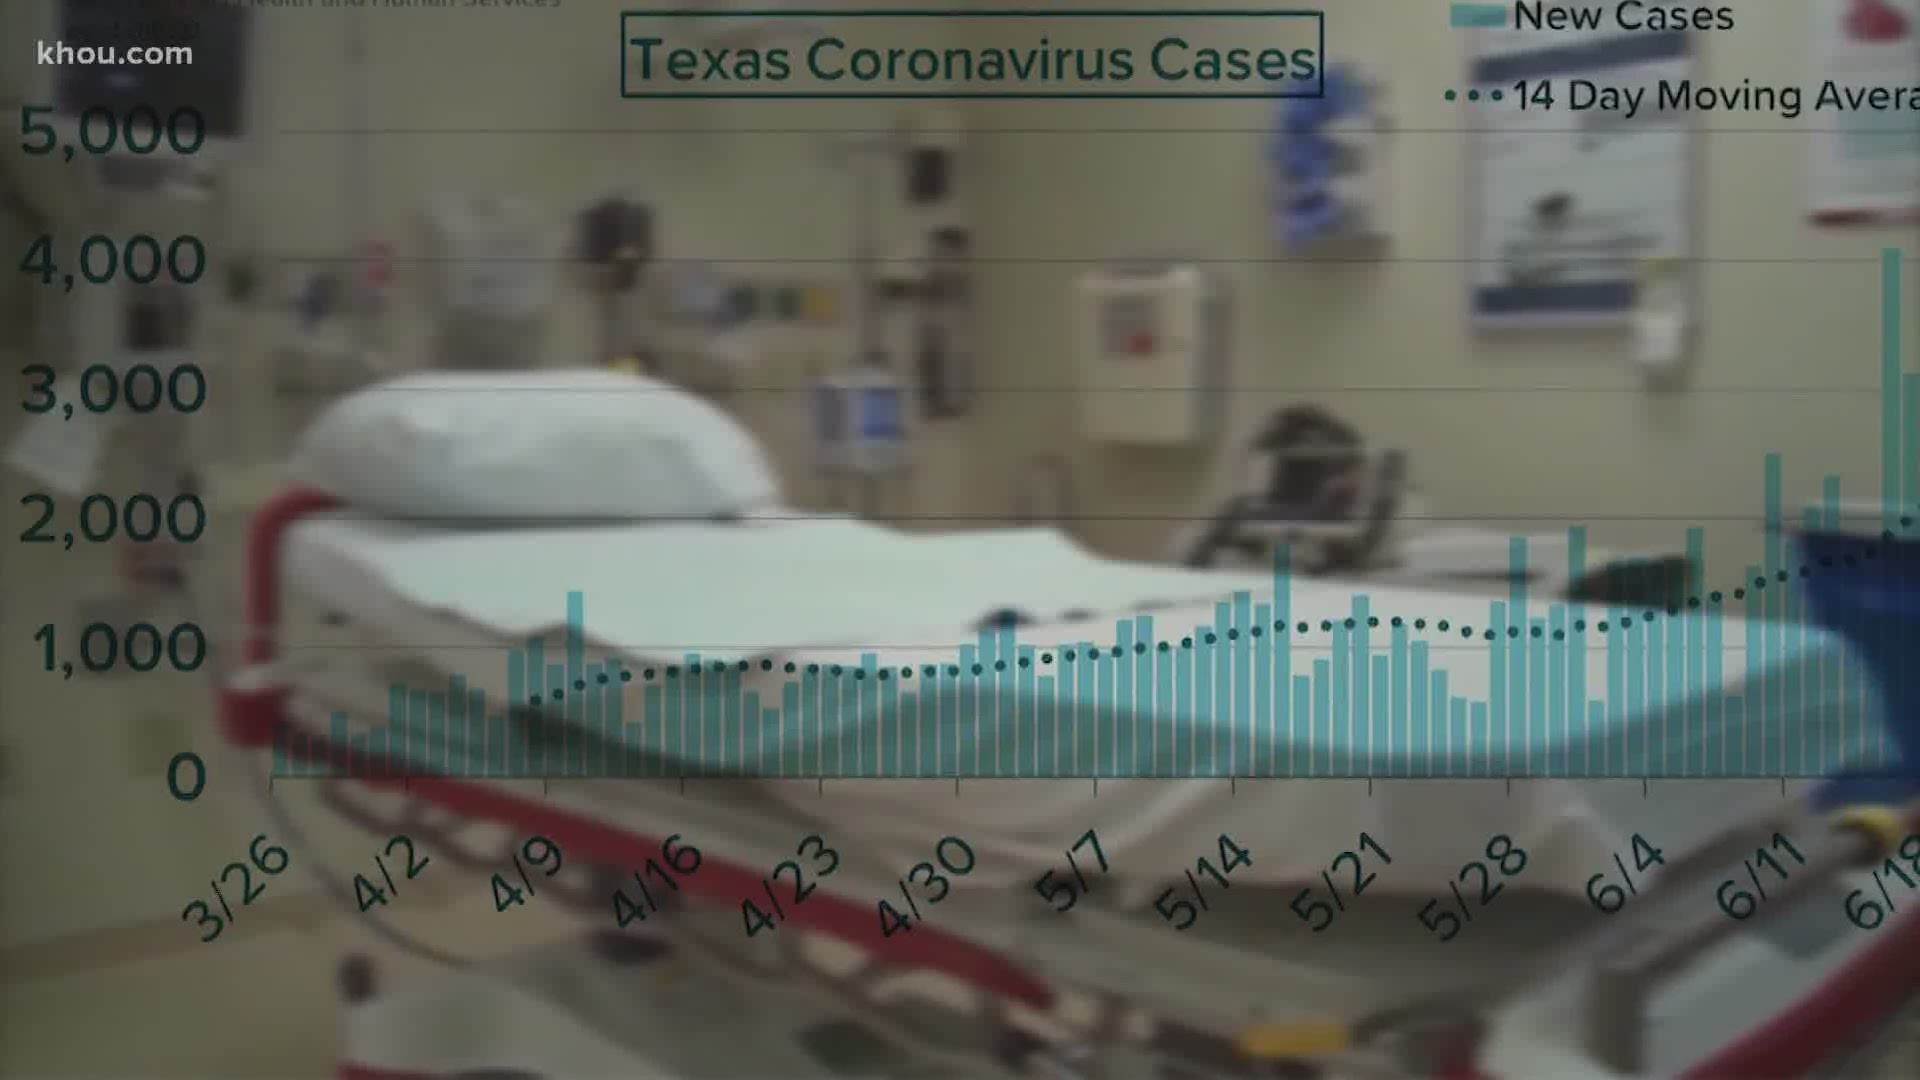 This week in coronavirus headlines, Texas saw a record number of cases, and elective surgeries were suspended in four of the state's largest counties.